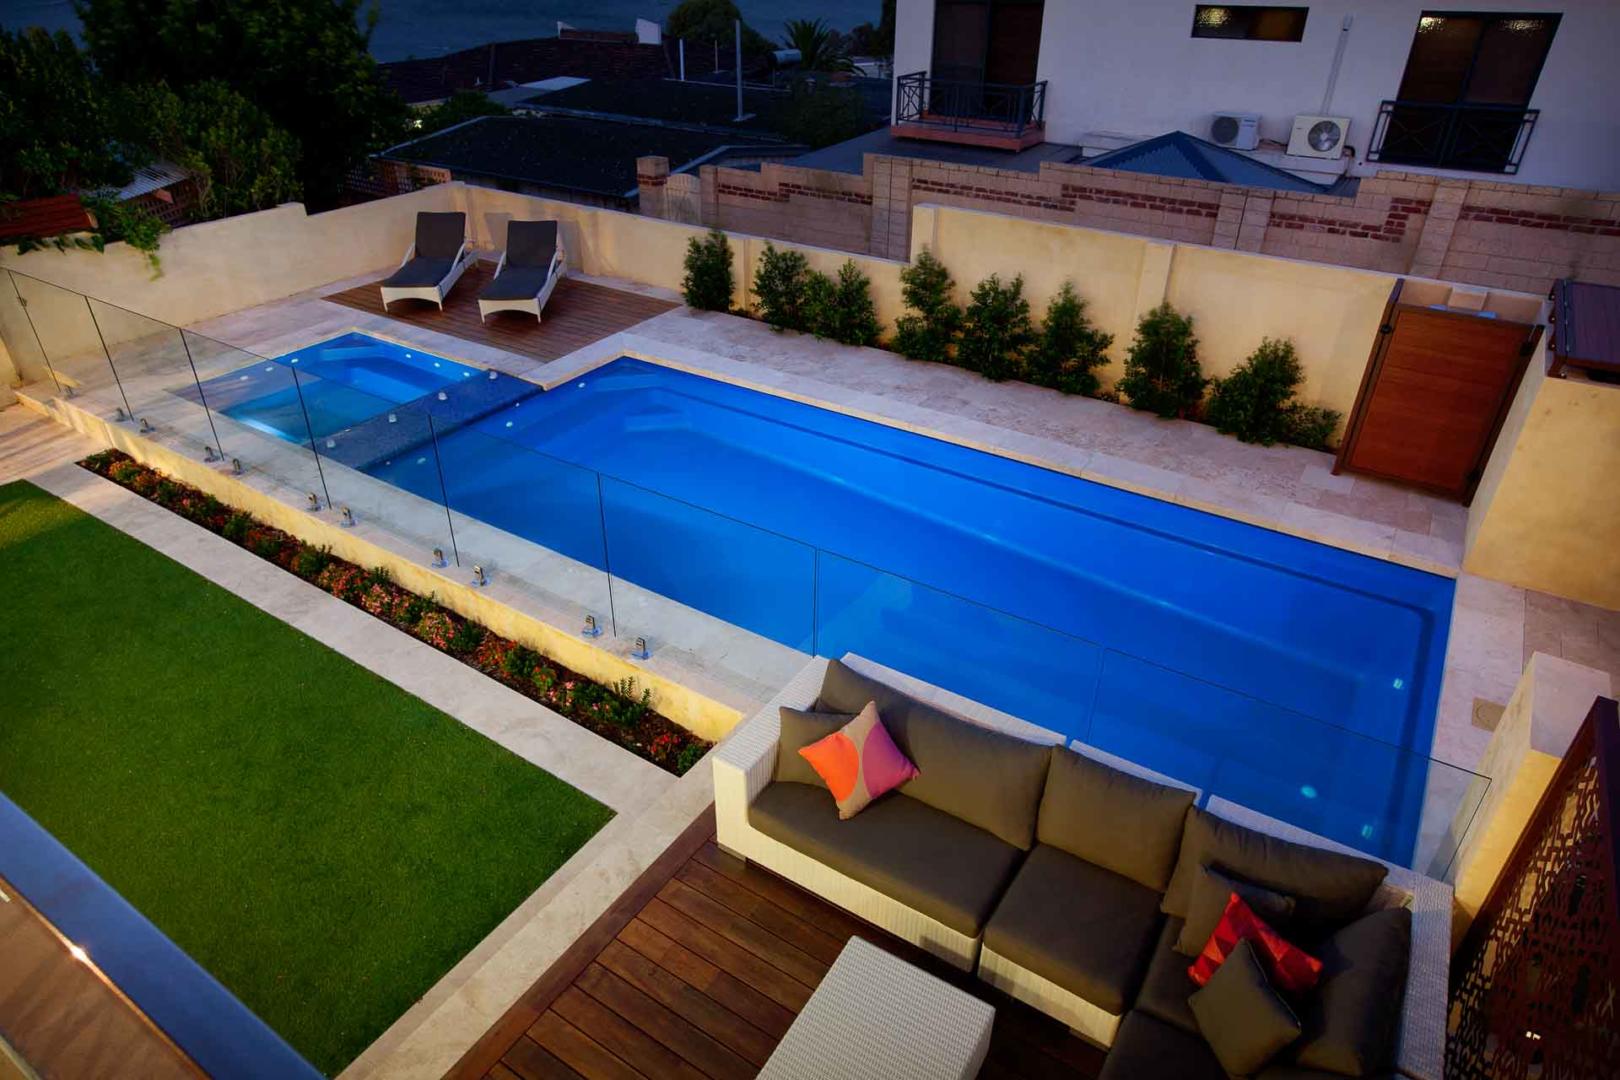 How to choose a swimming pool that’s right for your backyard - Consider the shape and size of your block, Australian Outdoor Living.